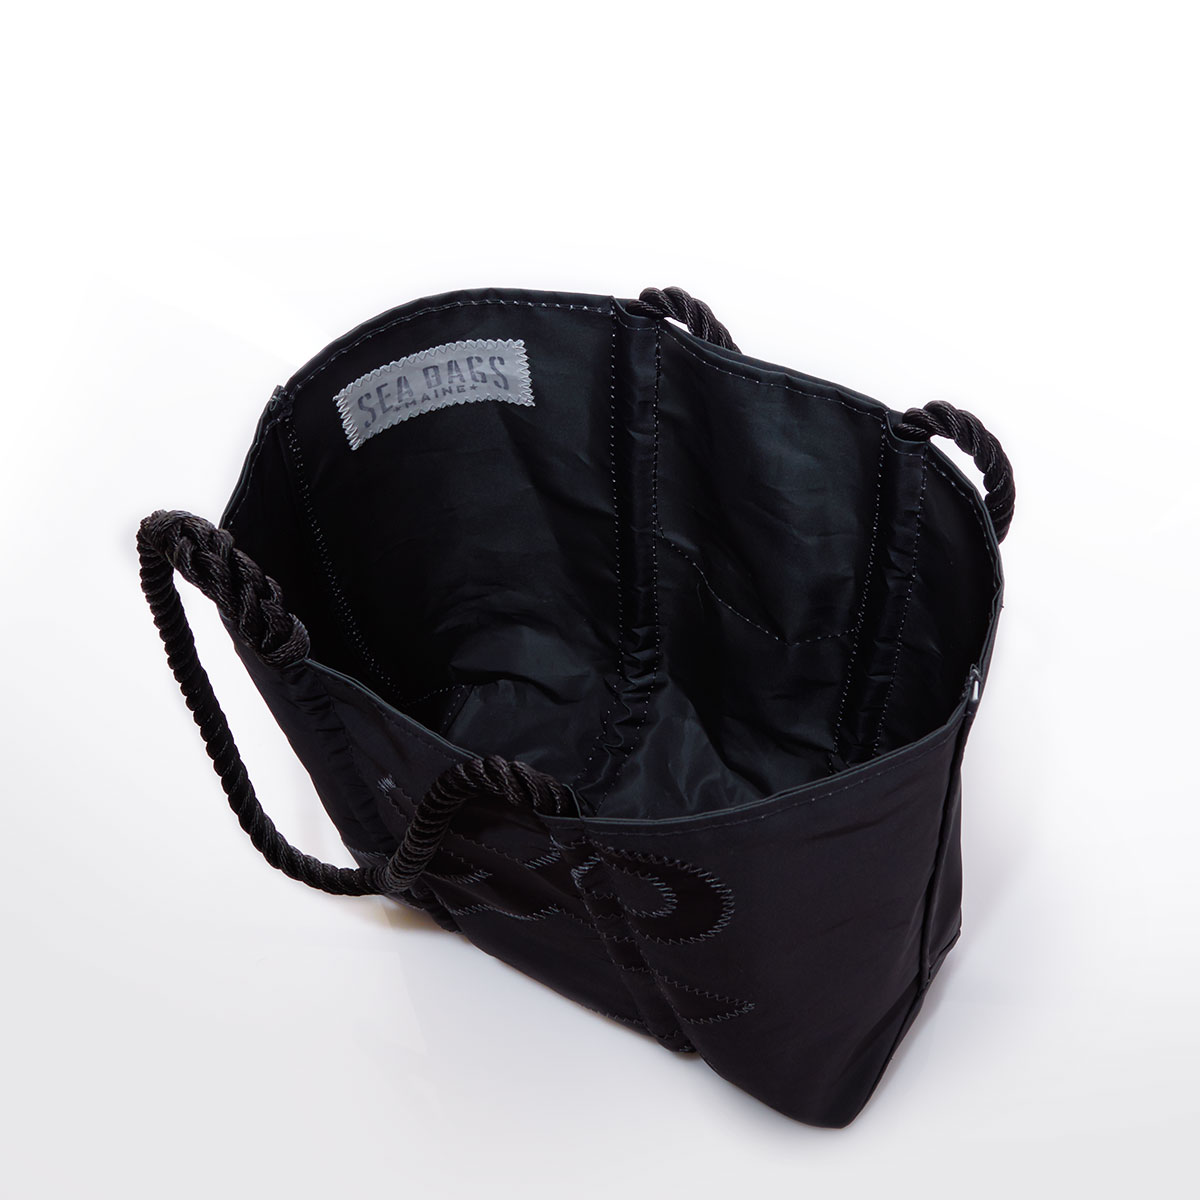 interior view of black recycled sail cloth tote with a black anchor applique and black rope handles and metal top clasp closure